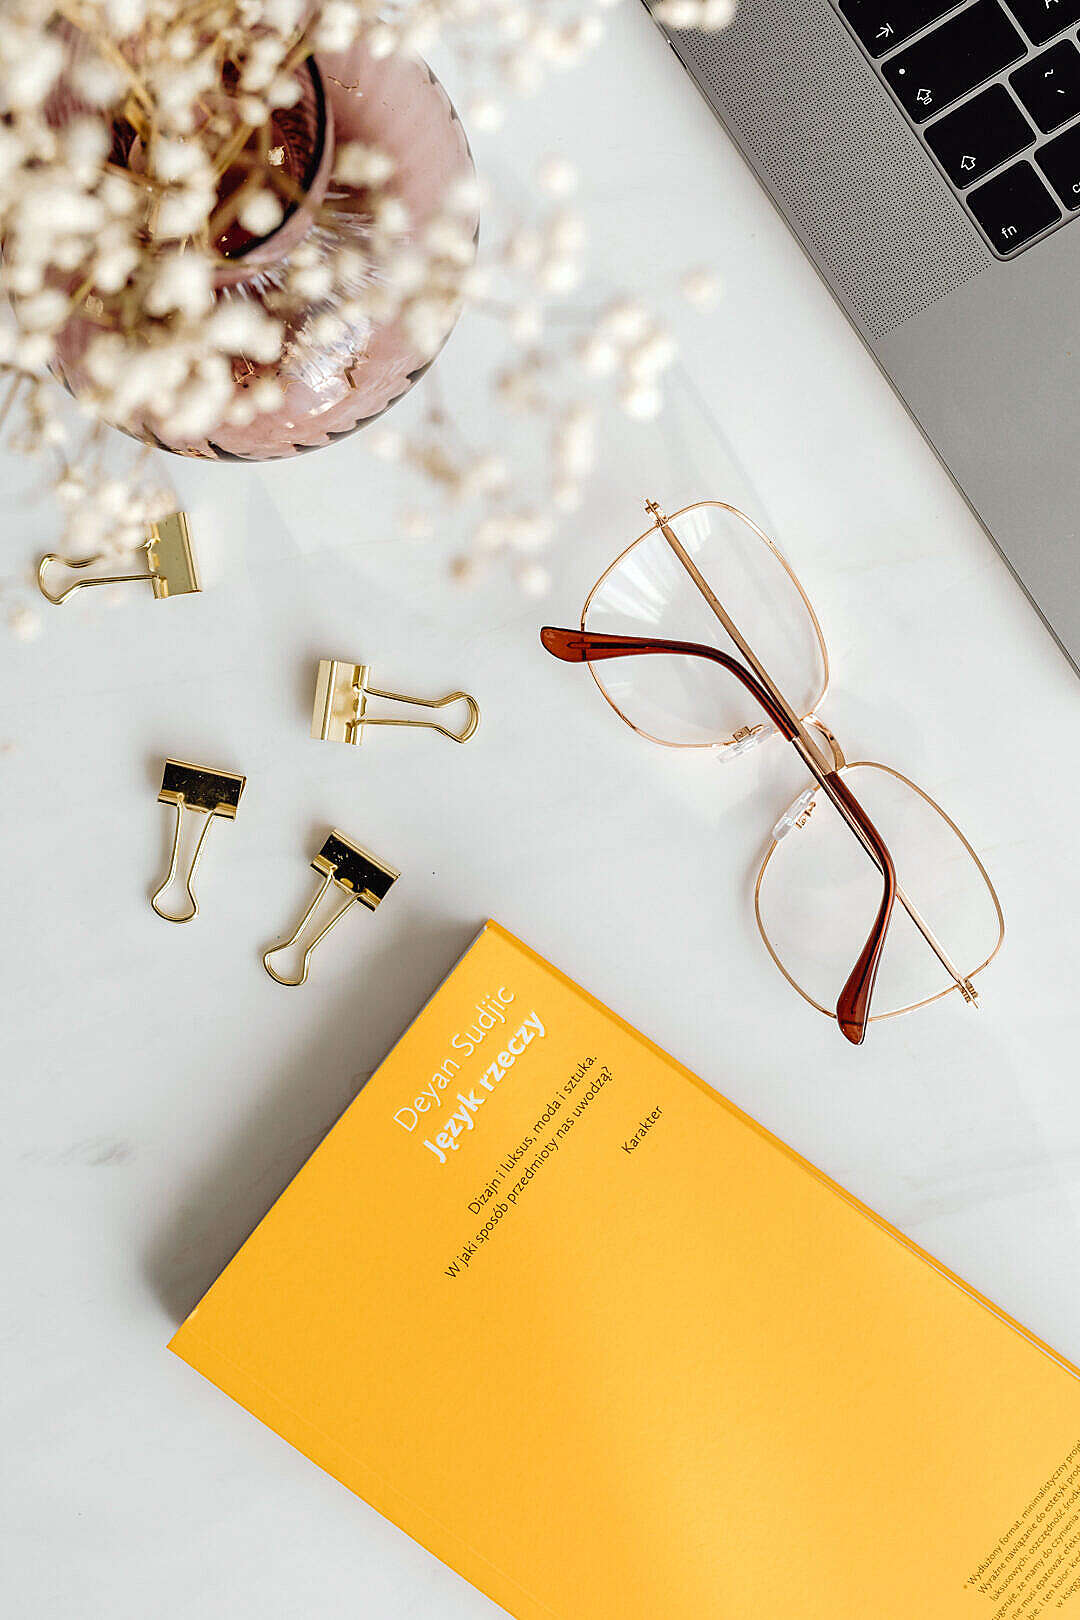 Download Creative Flatlay Design Book and Eyeglasses on the Table FREE Stock Photo